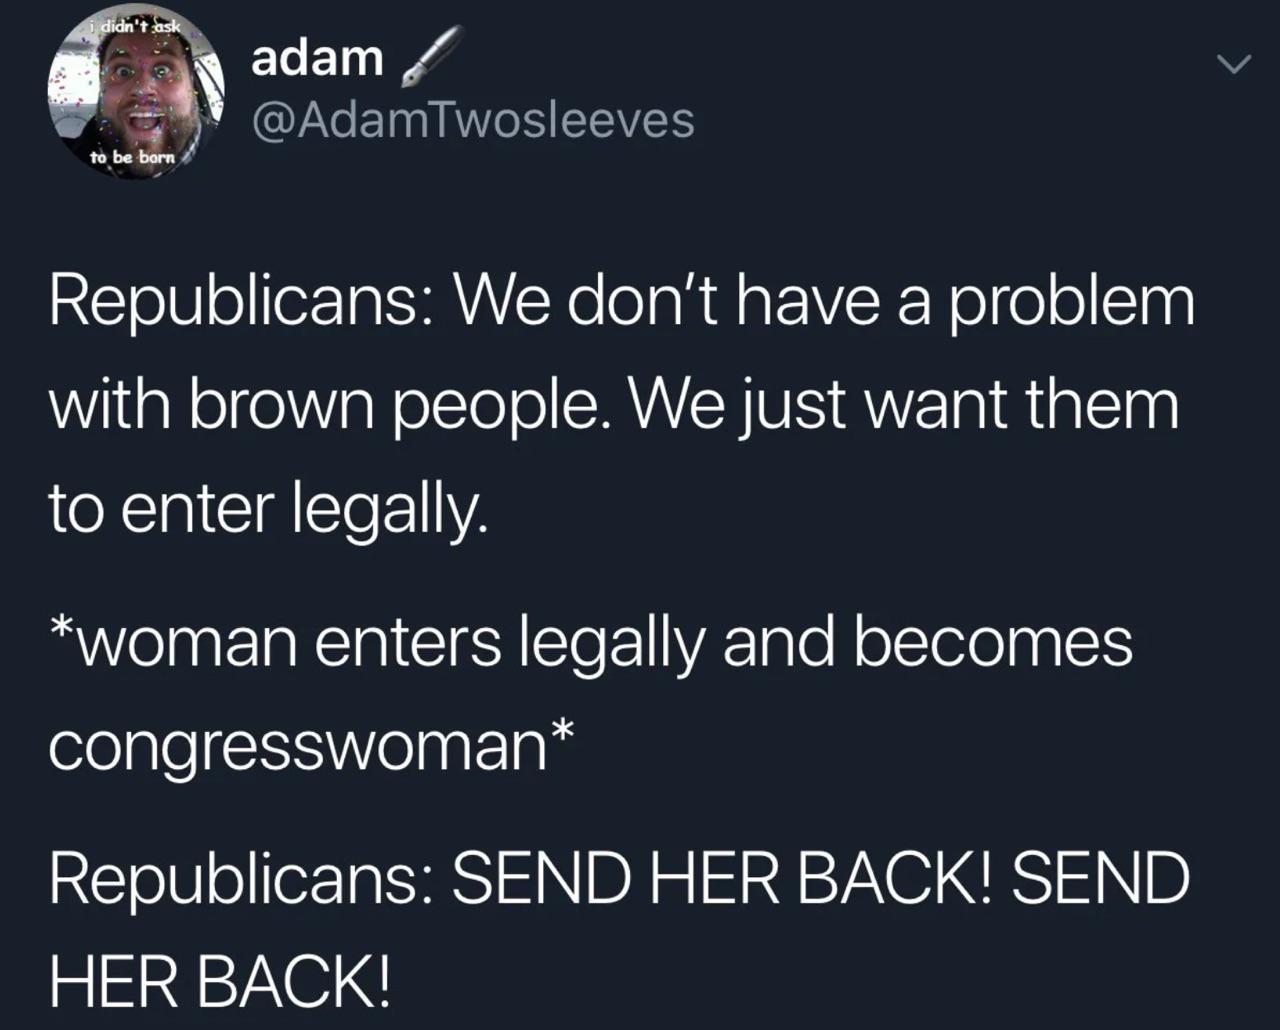 political political-memes political text: @AdamTwosleeves to be Republicans: We don't have a problem with brown people. We just want them to enter legally. *woman enters legally and becomes congresswoman* Republicans: SEND HER BACK! SEND HER BACK! 